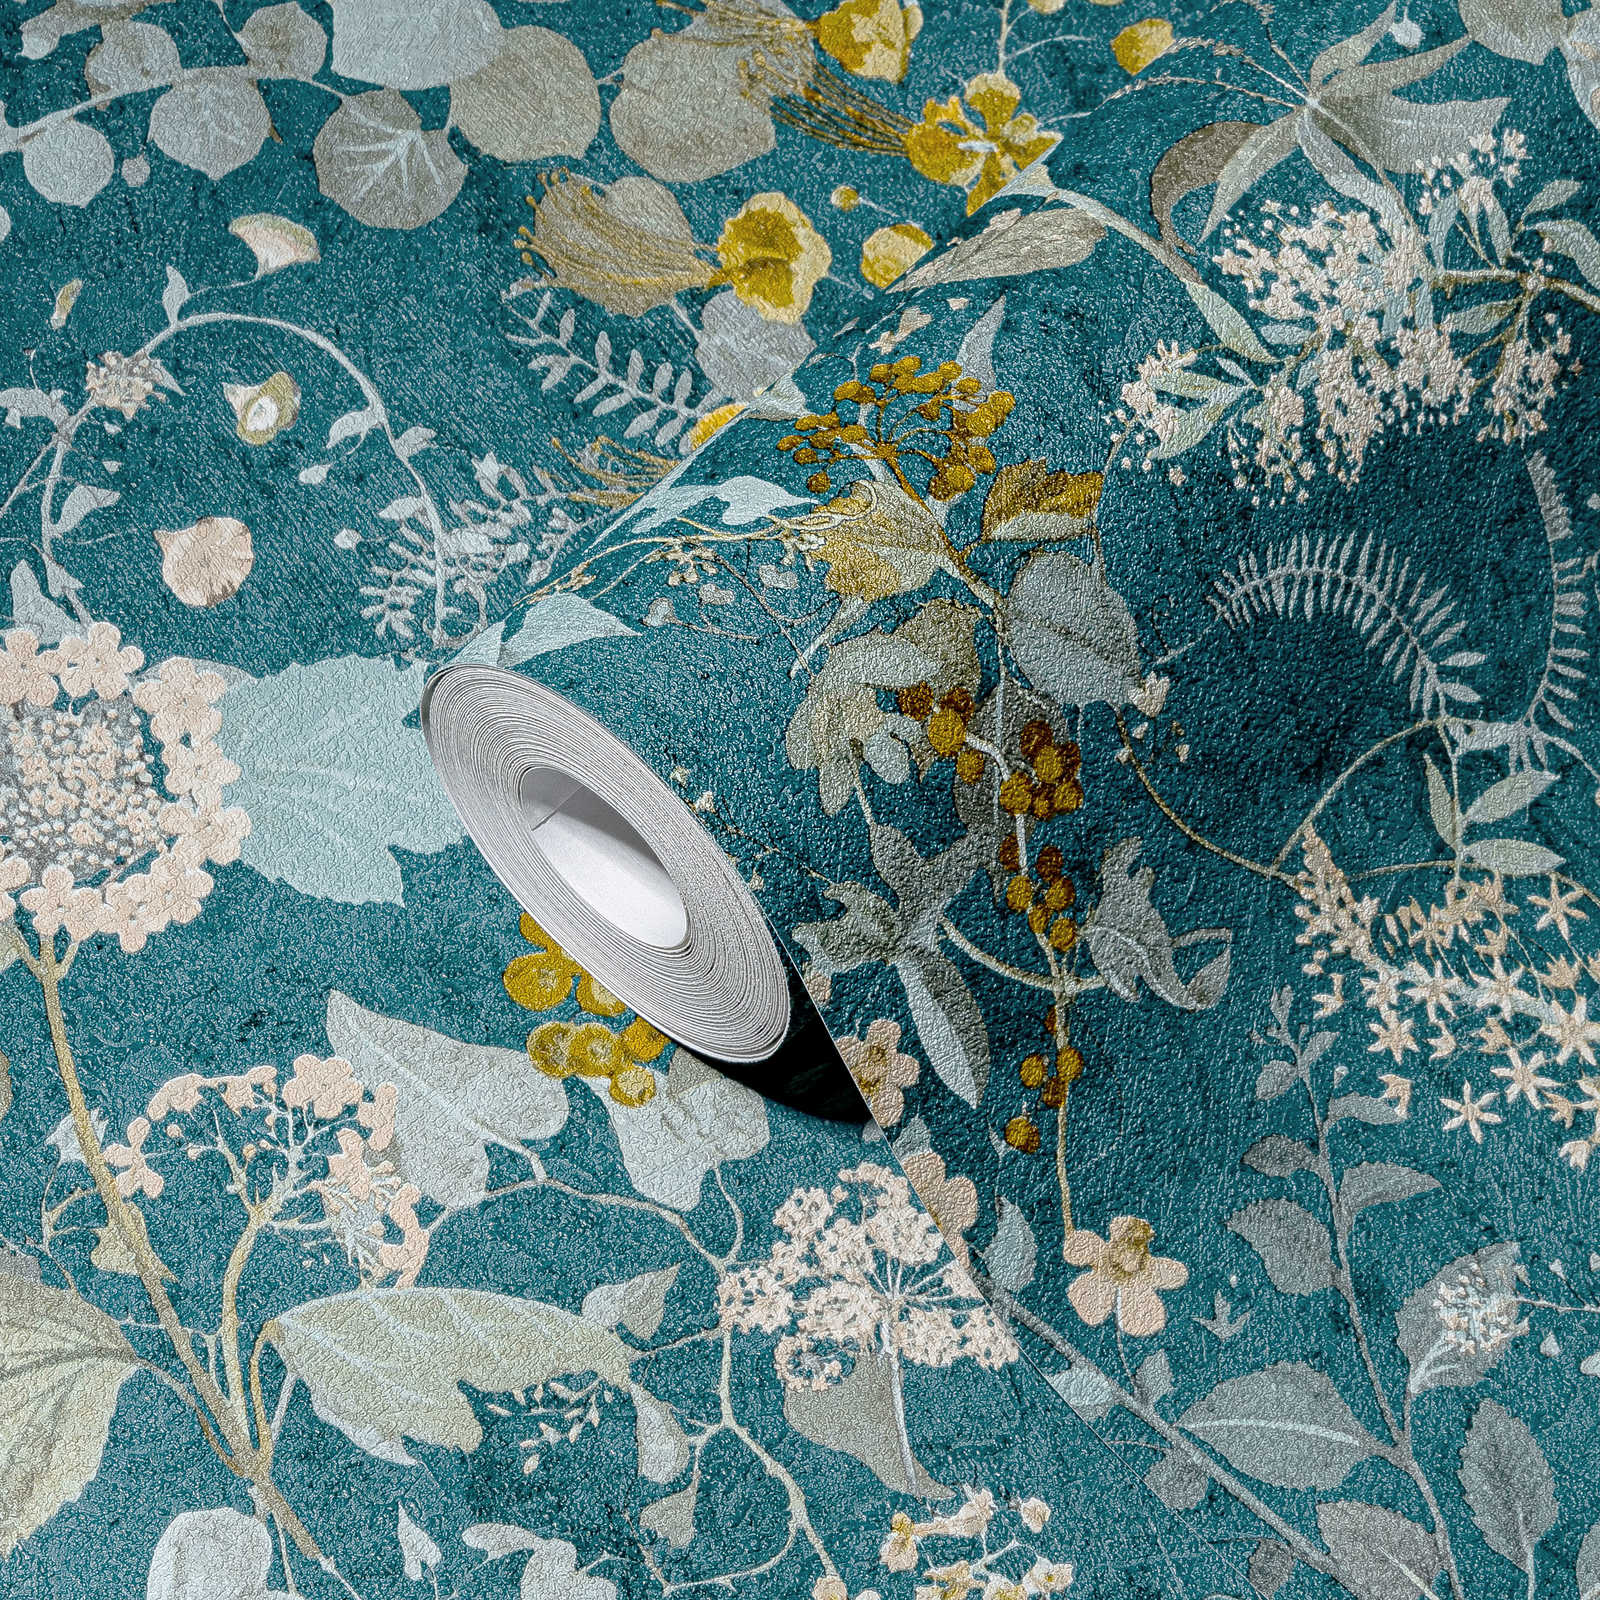             Floral wallpaper petrol with floral pattern - green, yellow
        